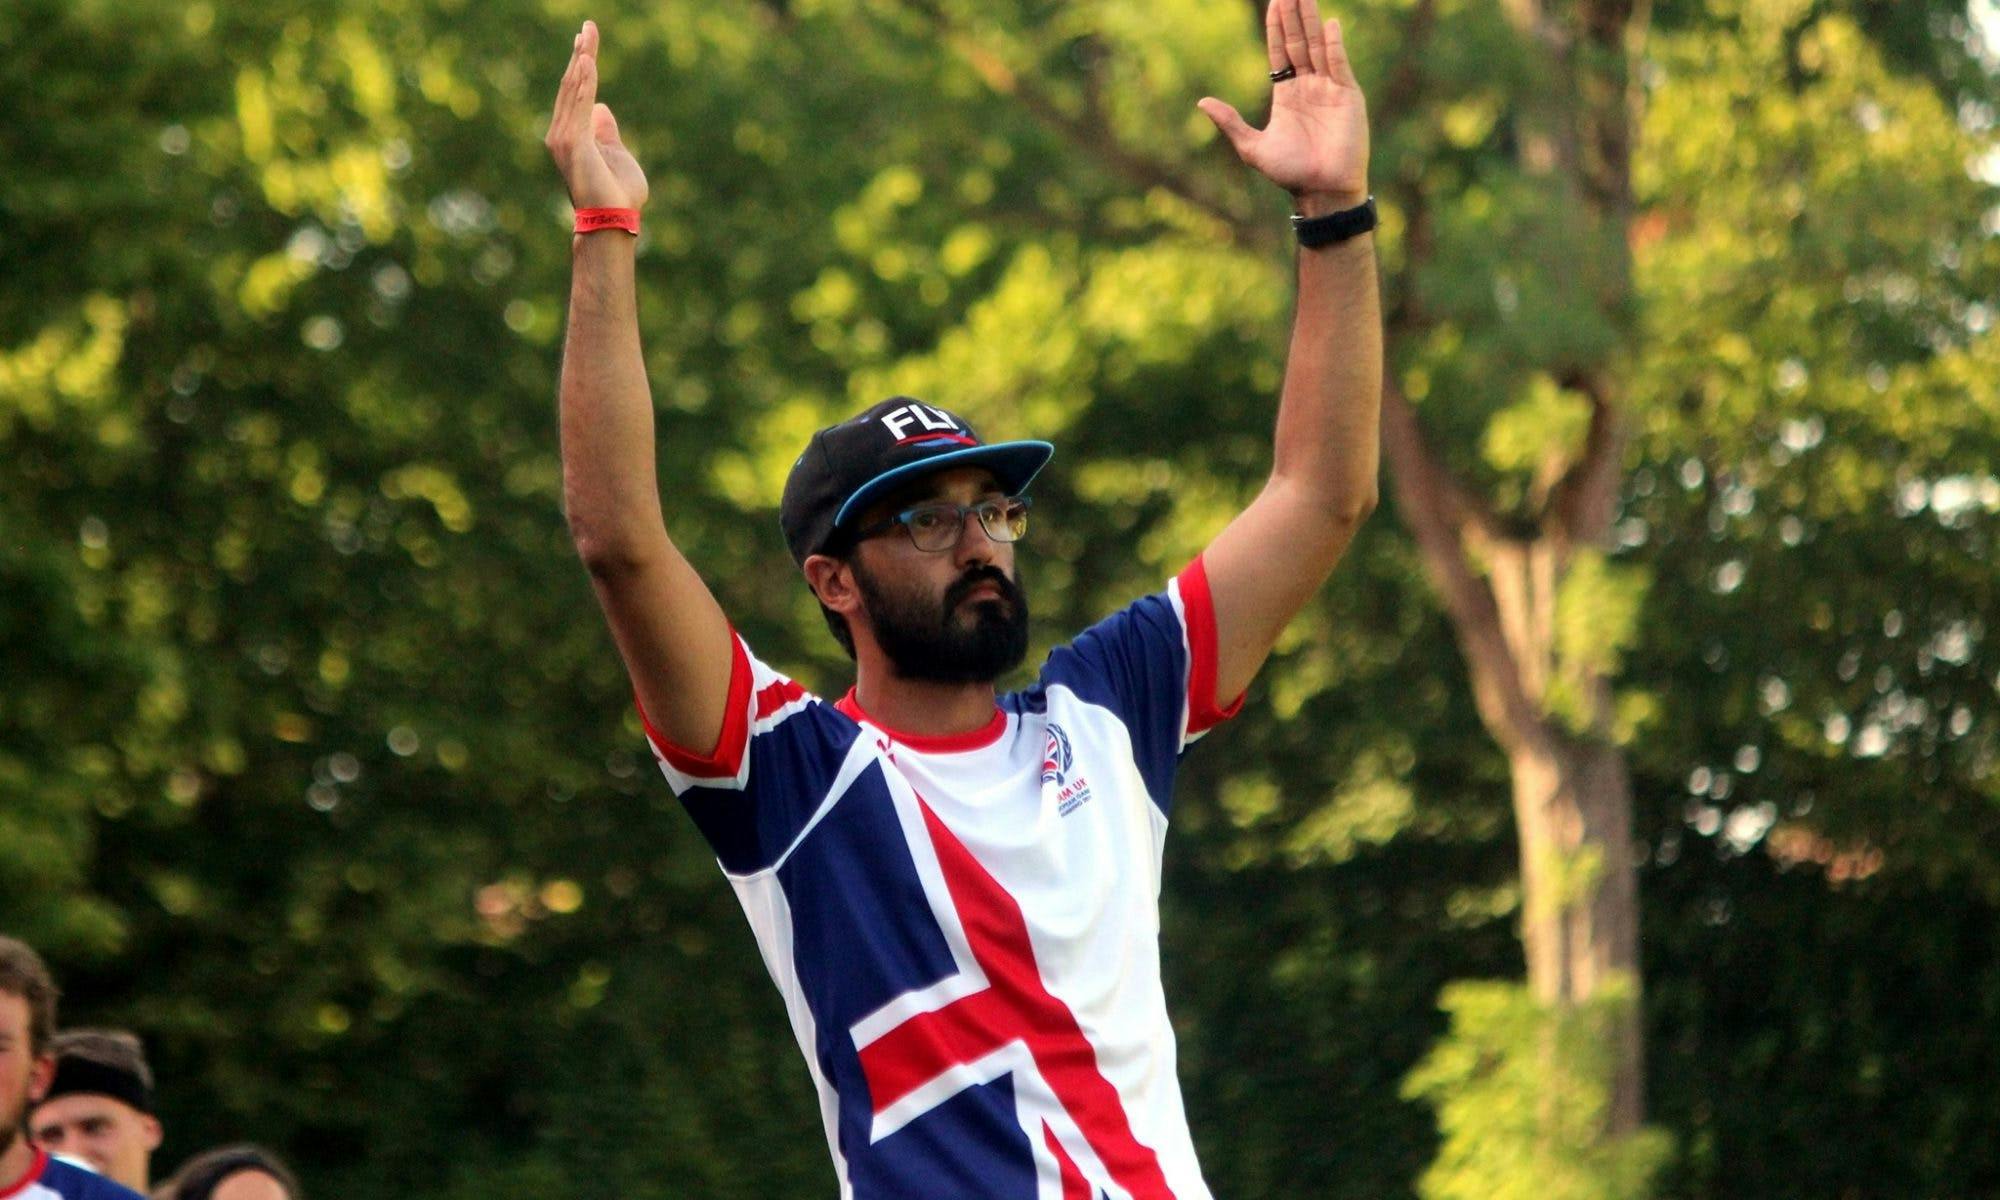 James Thanangadan stands wearing a Team UK Kit with his arms raised to indicate a goal